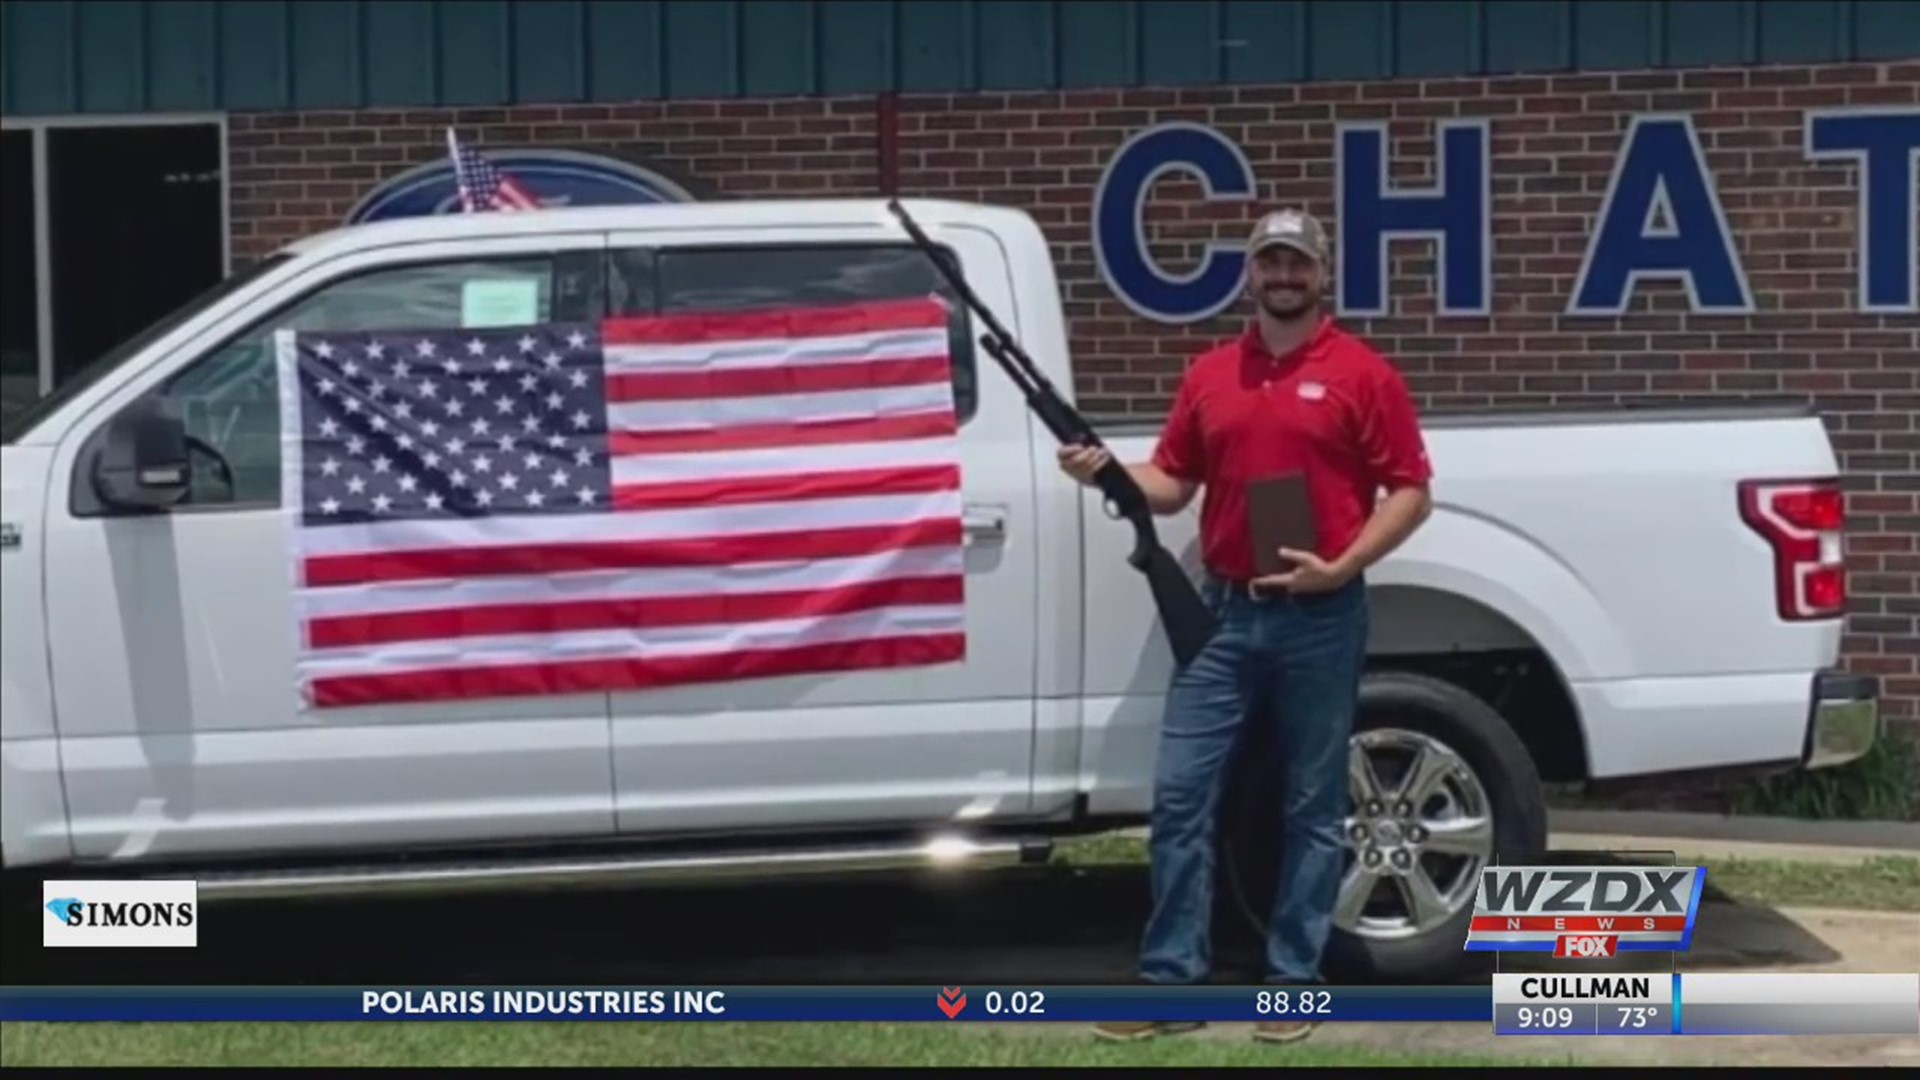 A South Alabama car dealership's promotion went viral, and now it's over.